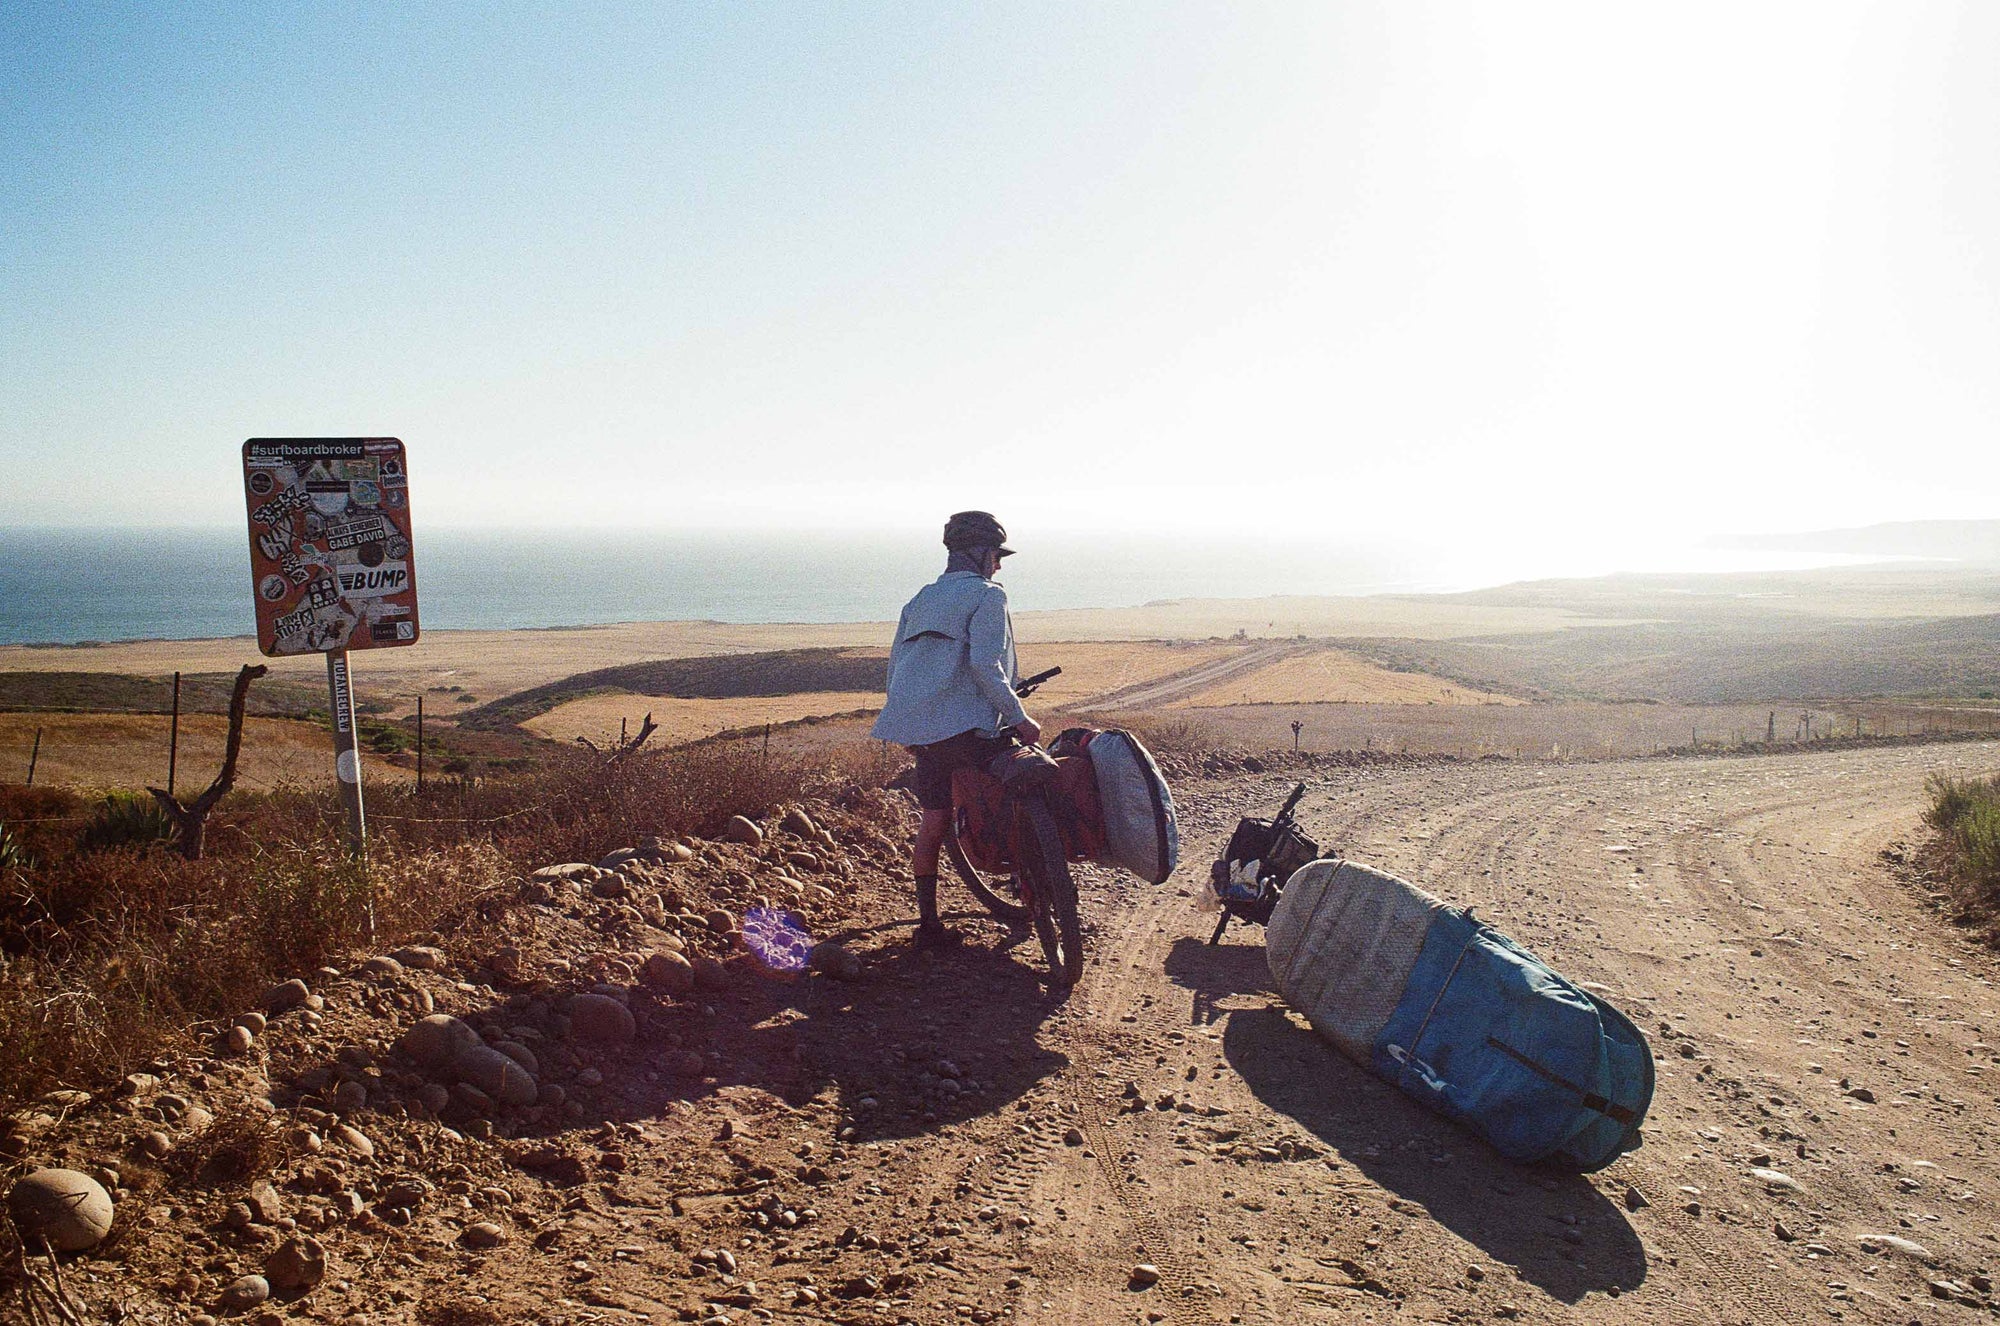 Surfpacking in Baja, involves bikepacking with surfboards